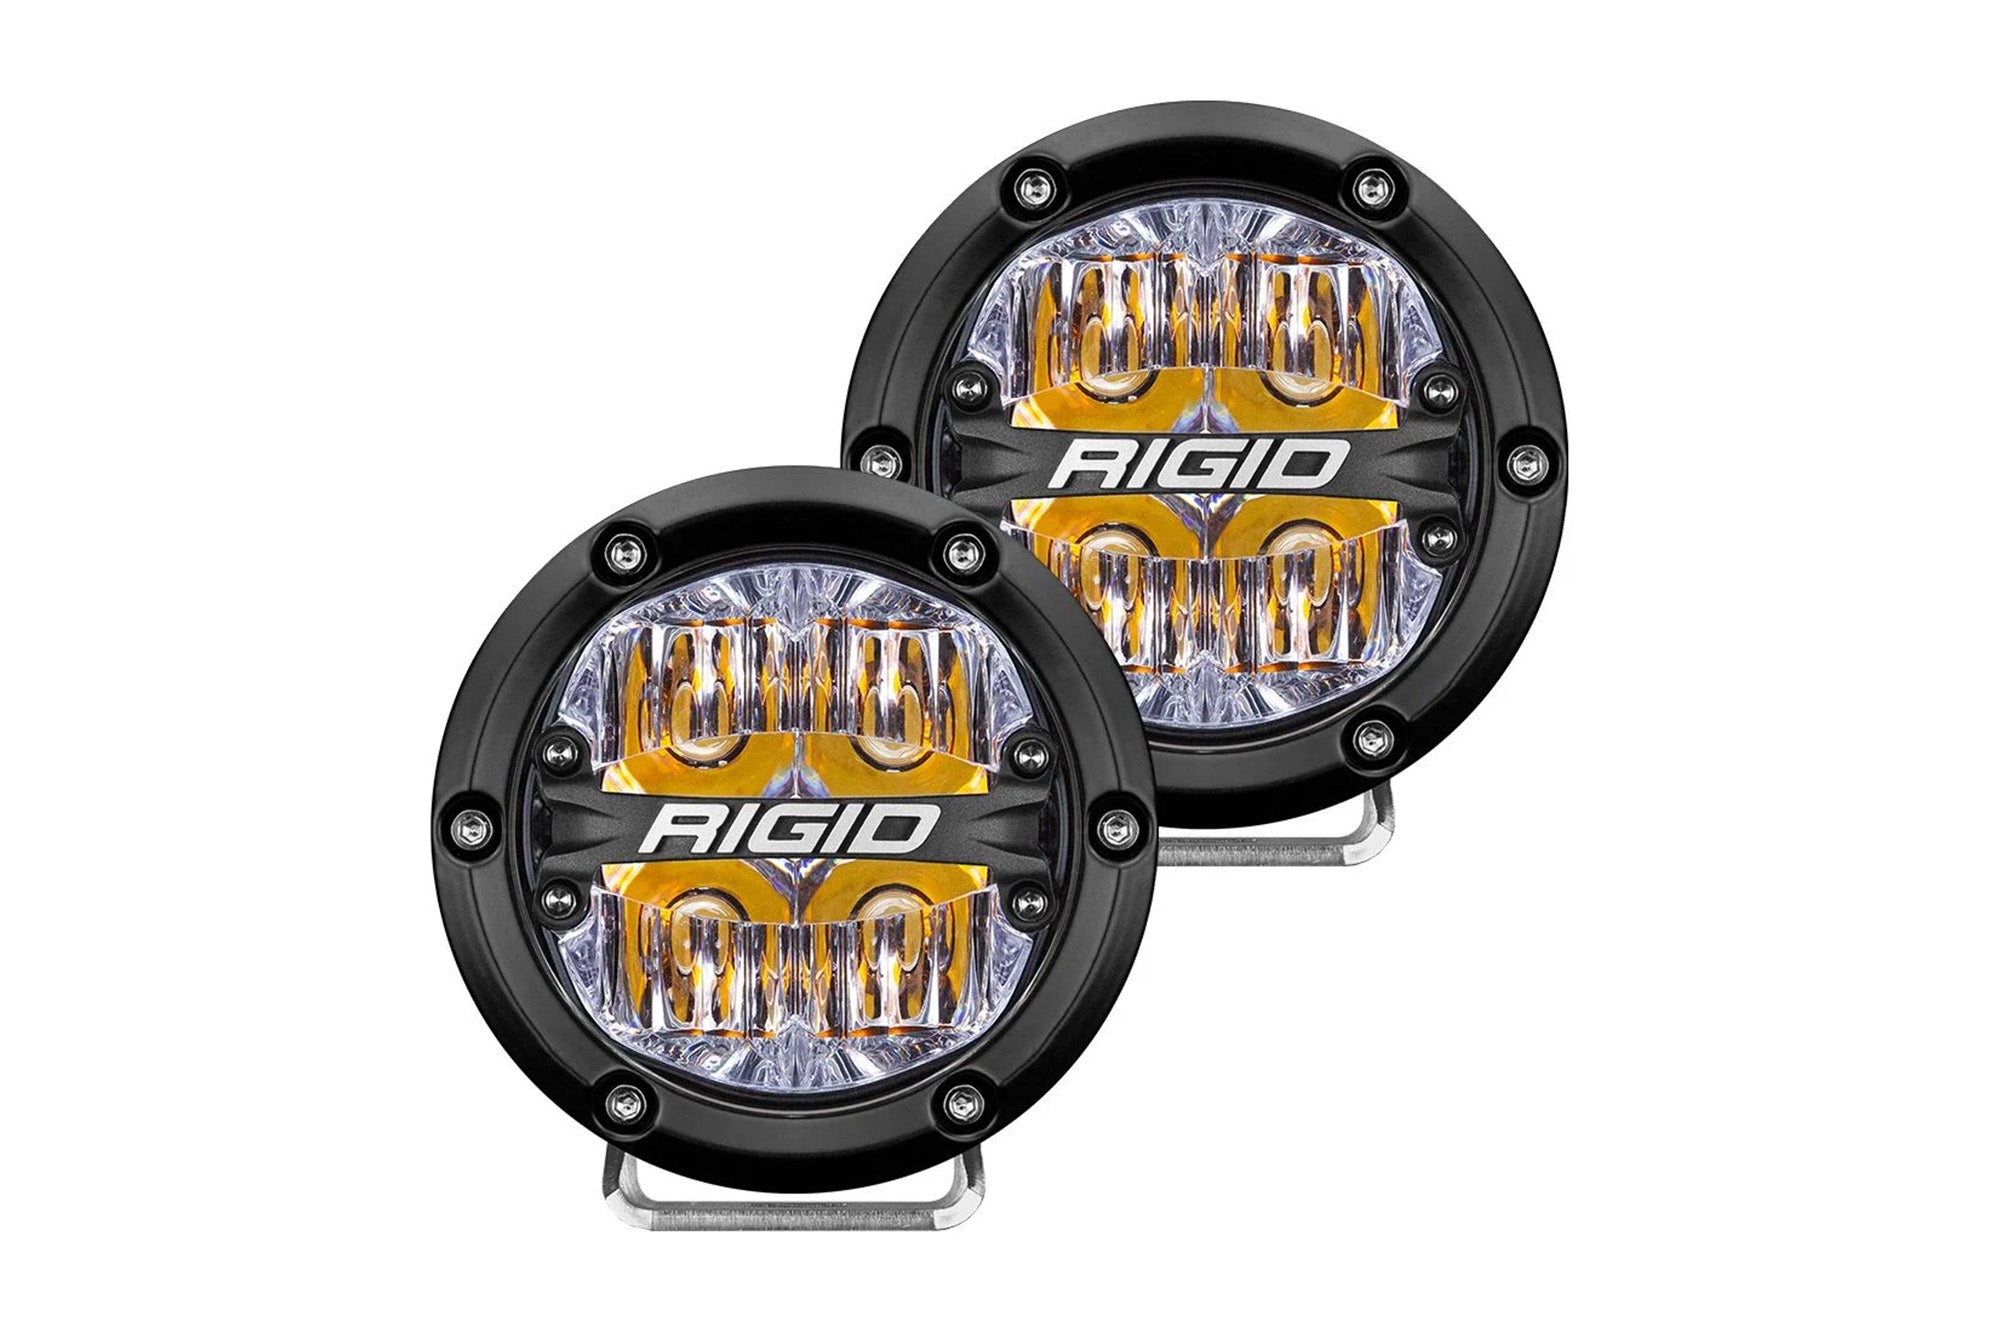 Rigid 360-Series 4 Inch LED Off-Road Drive Beam Amber Backlight Pair